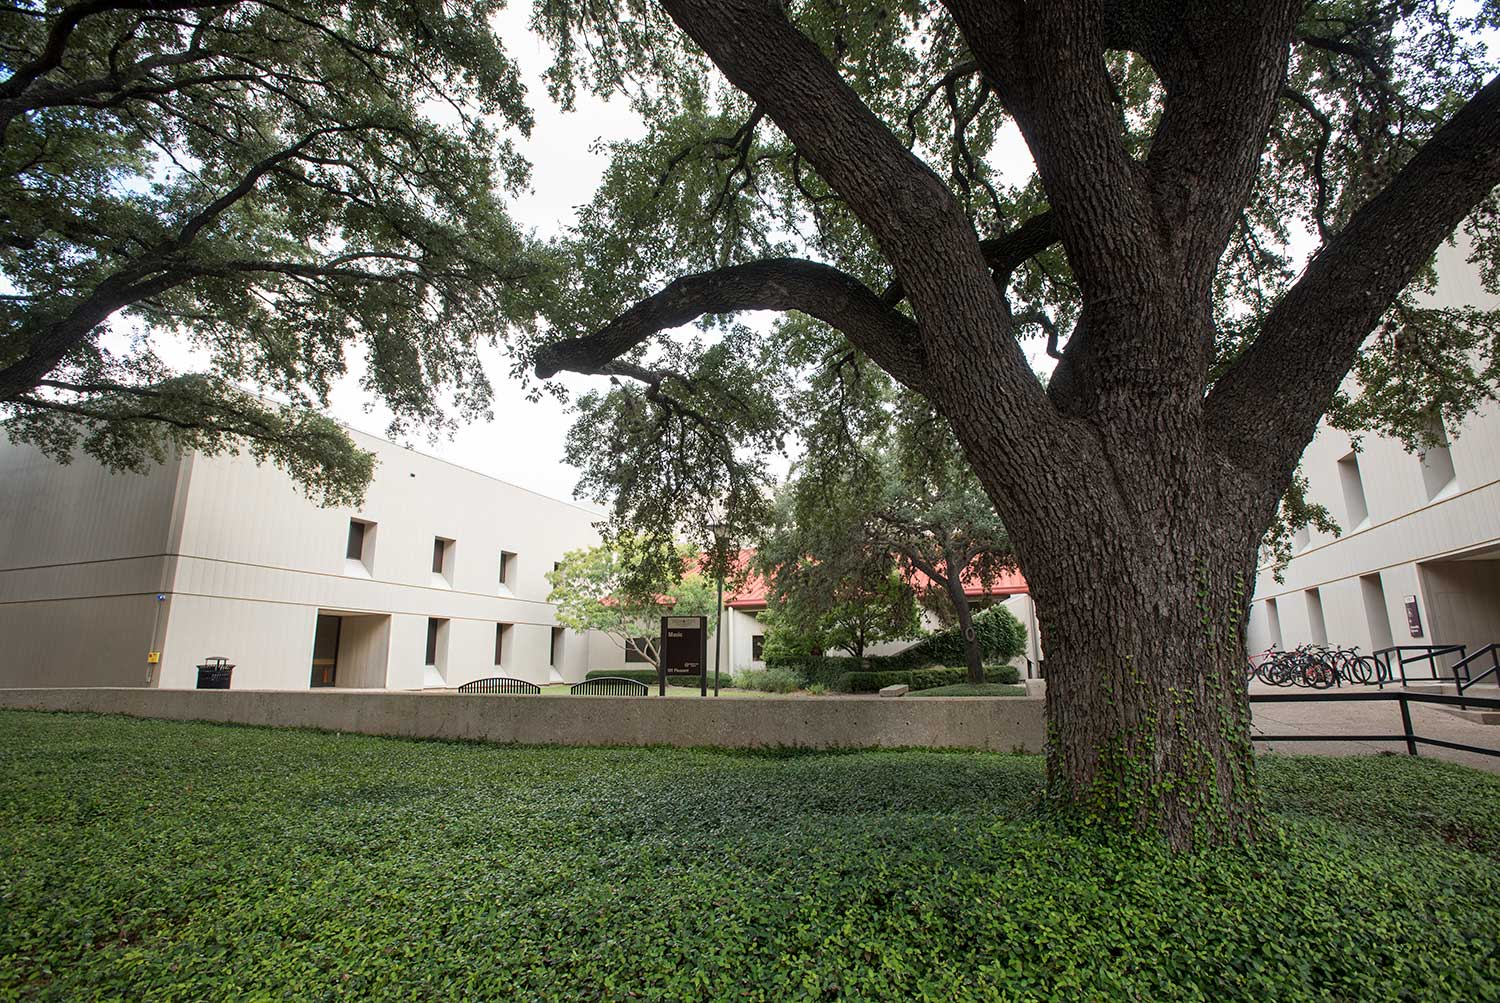 exterior view of the Schneider Music Library and the large tree in front of the building